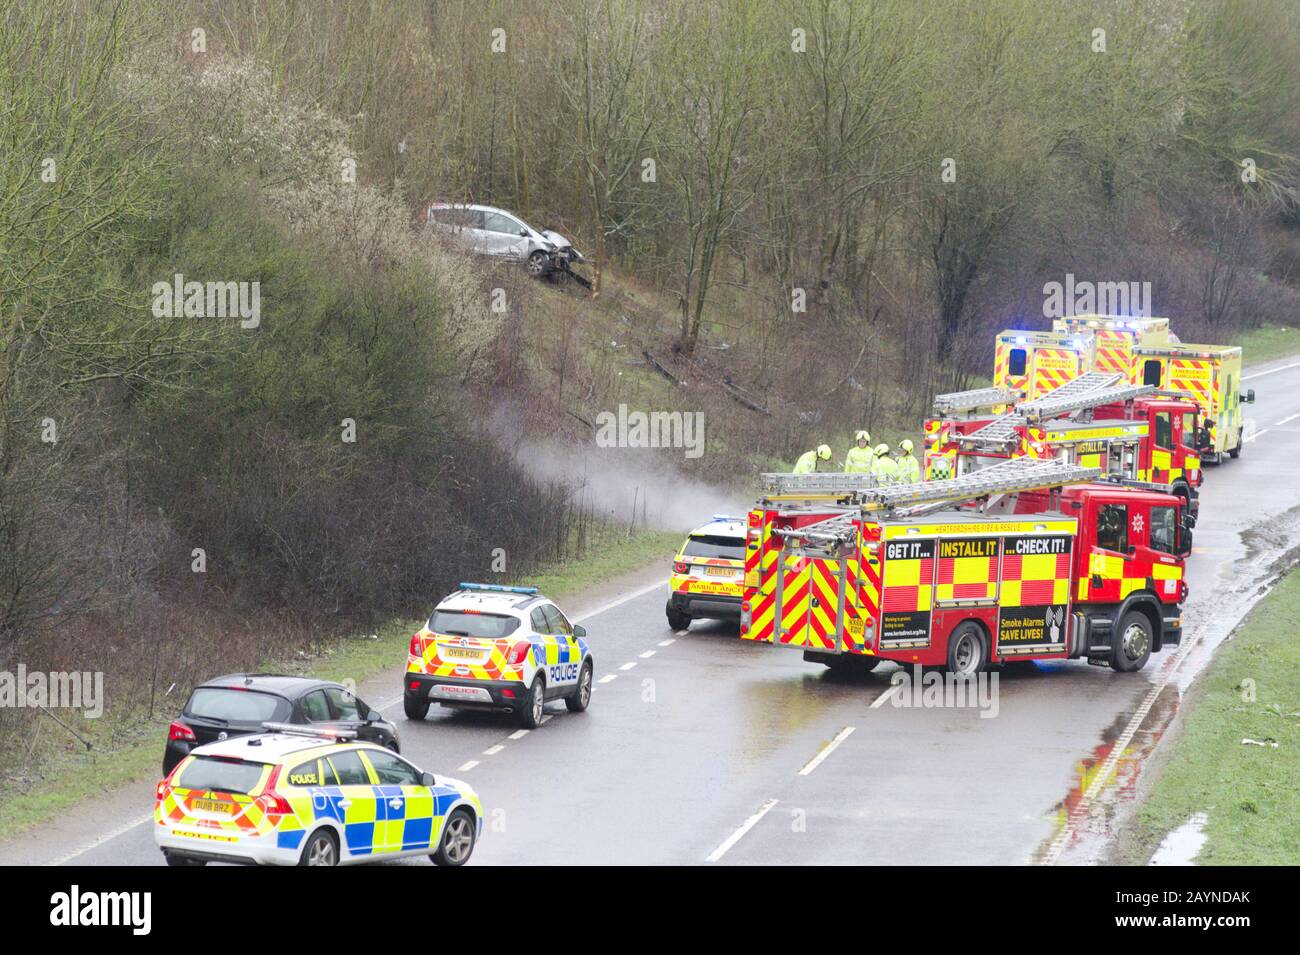 Hertford, UK. 16th Feb, 2020. A car has crashed onto the A10 verge near Hertford. Several emergency vehicles attended and the road was closed at junction before the accident. The incident was on the southbound side of the A10. Credit: Andrew Steven Graham/Alamy Live News Stock Photo